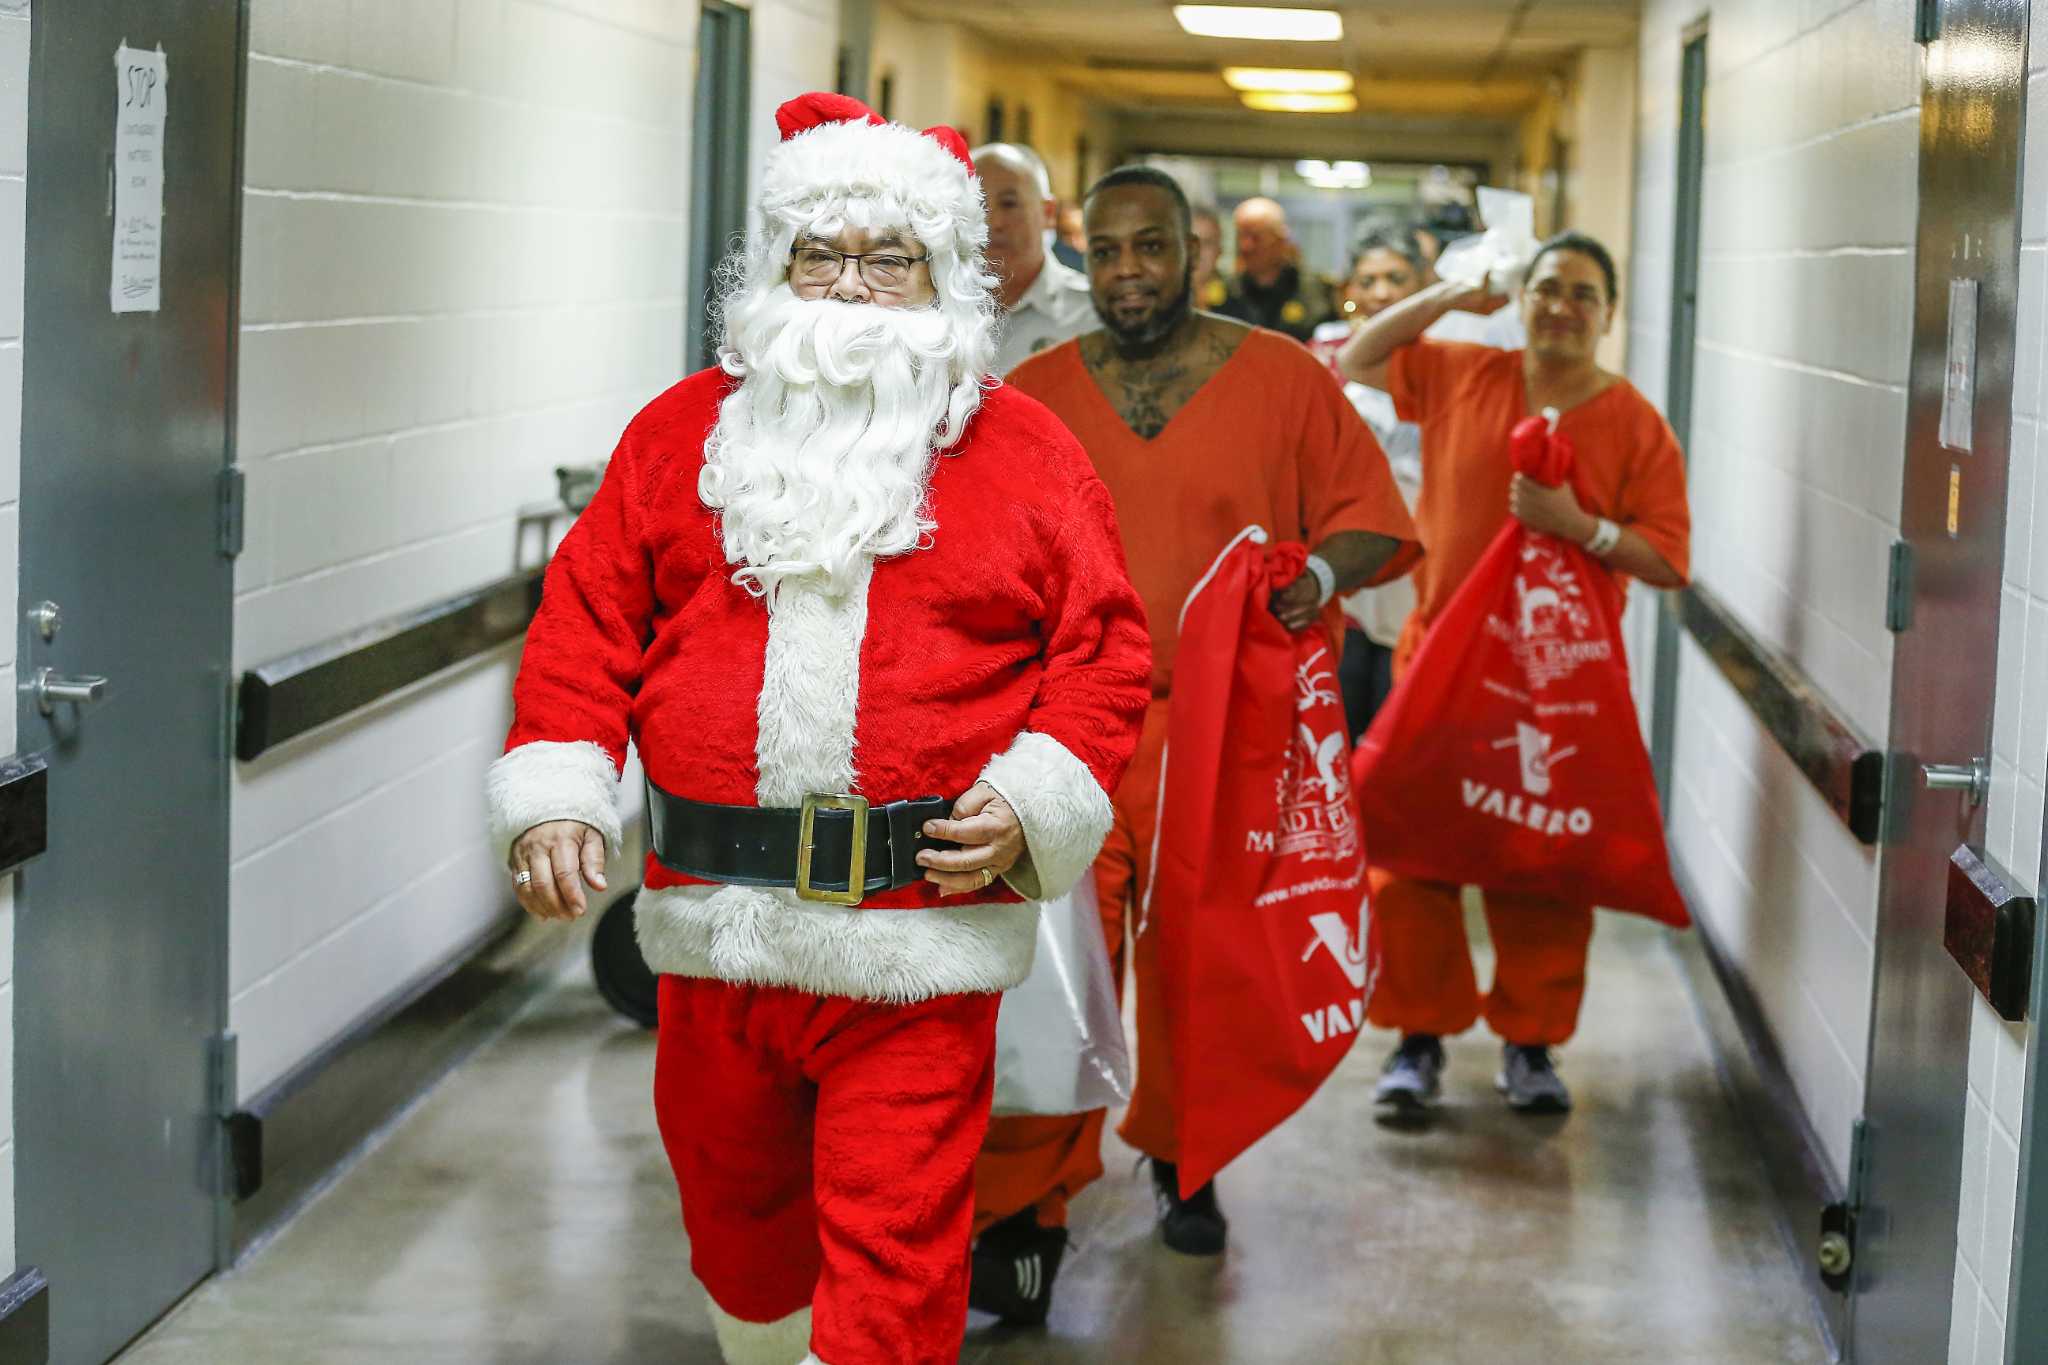 Santa Claus pays belated visit to Harris County jail - Houston Chronicle2048 x 1365